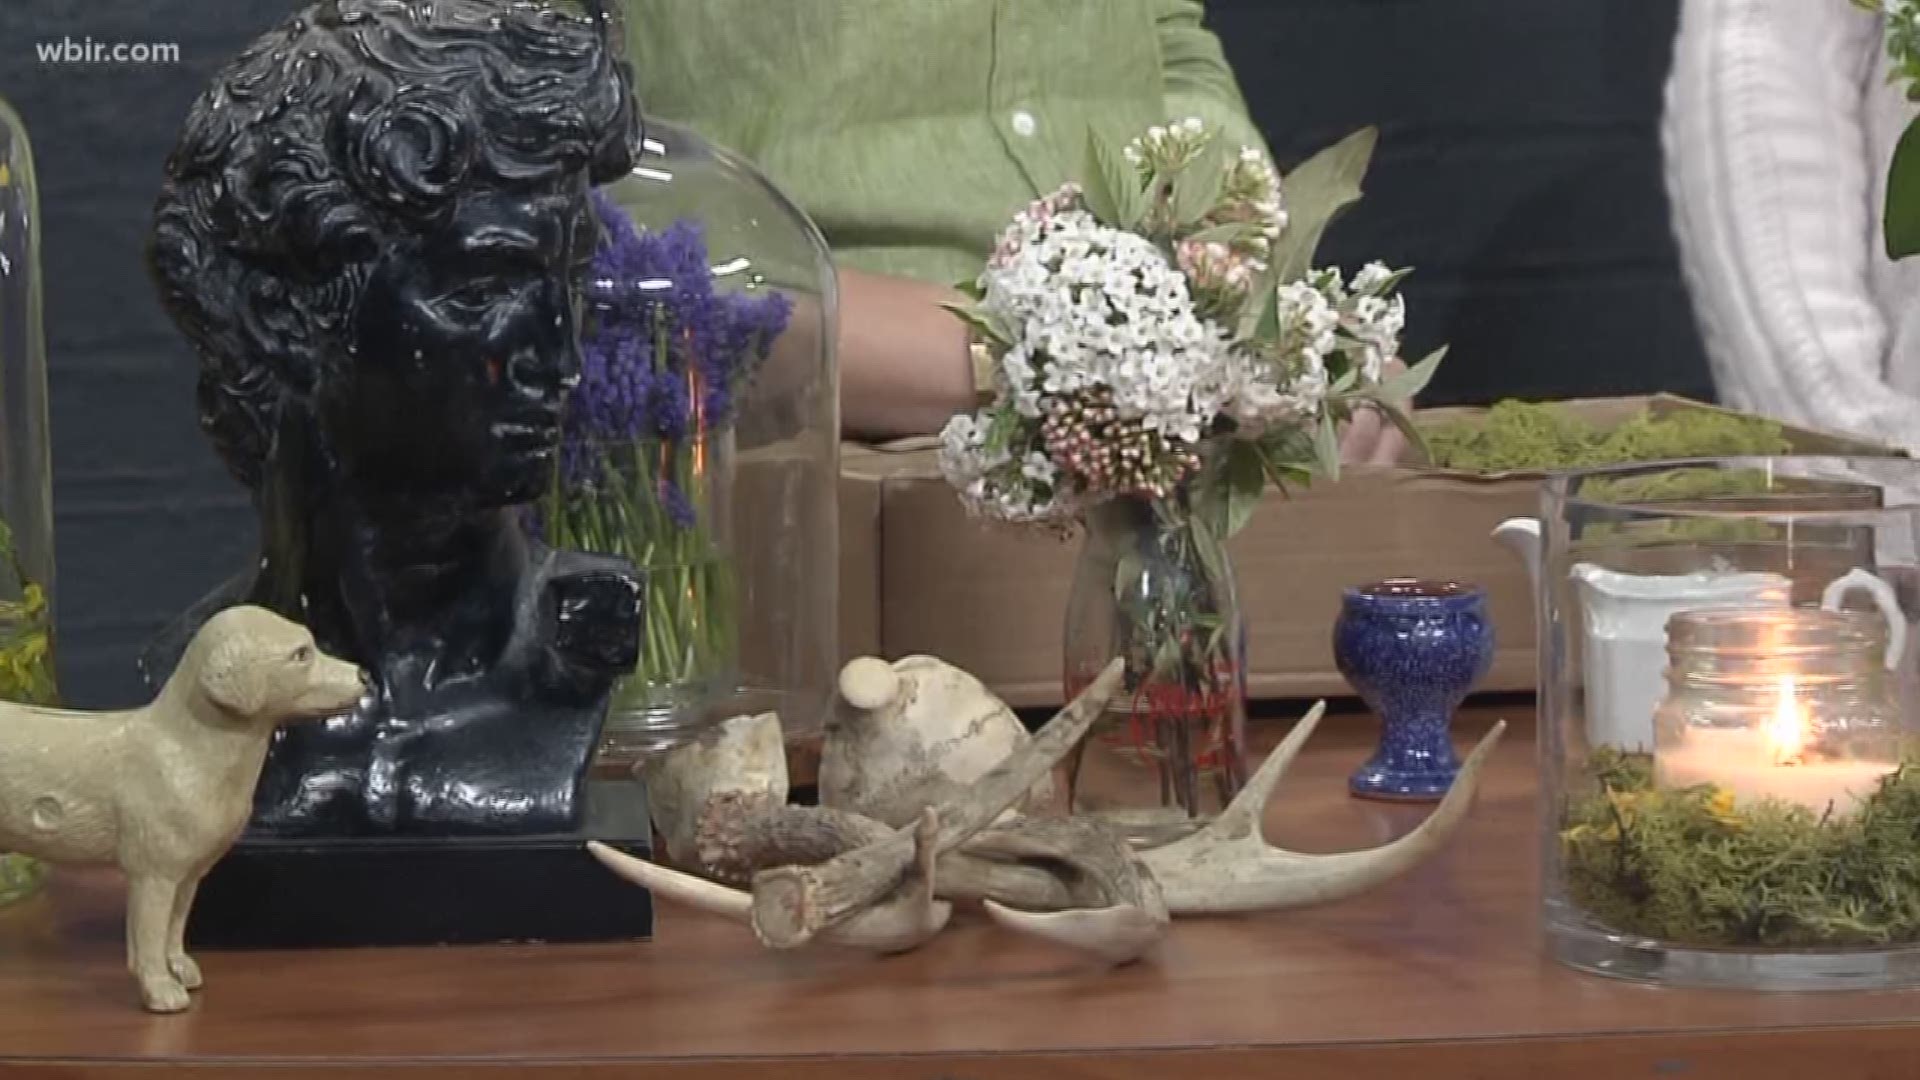 Interior stylist Brooke Phillips shows us how to repurpose random items you may have while spring cleaning your home.